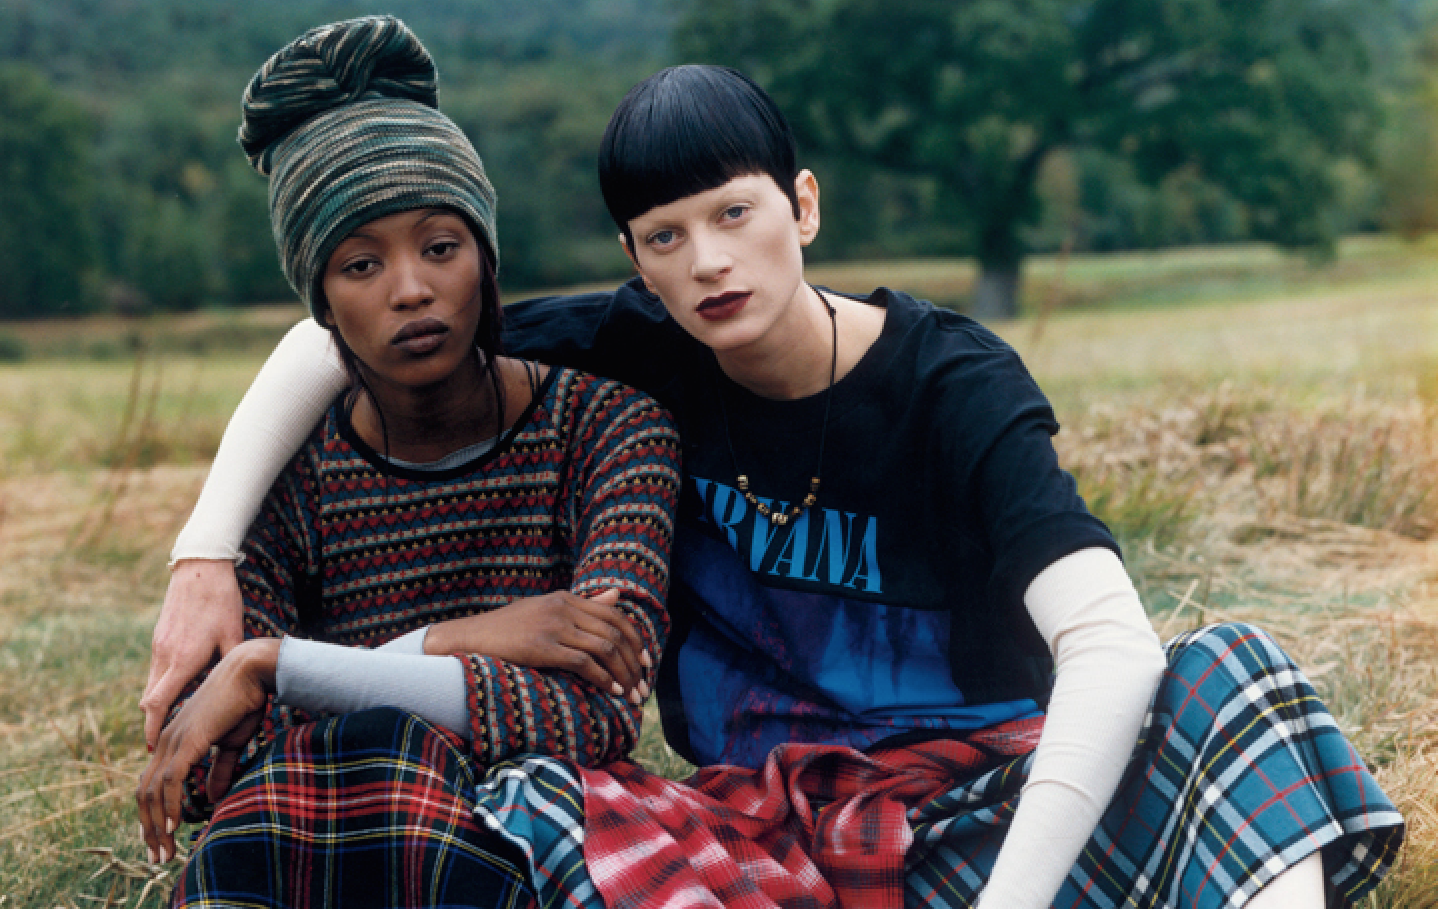 Marc Jacobs Revives His Controversial 90s Grunge Collection